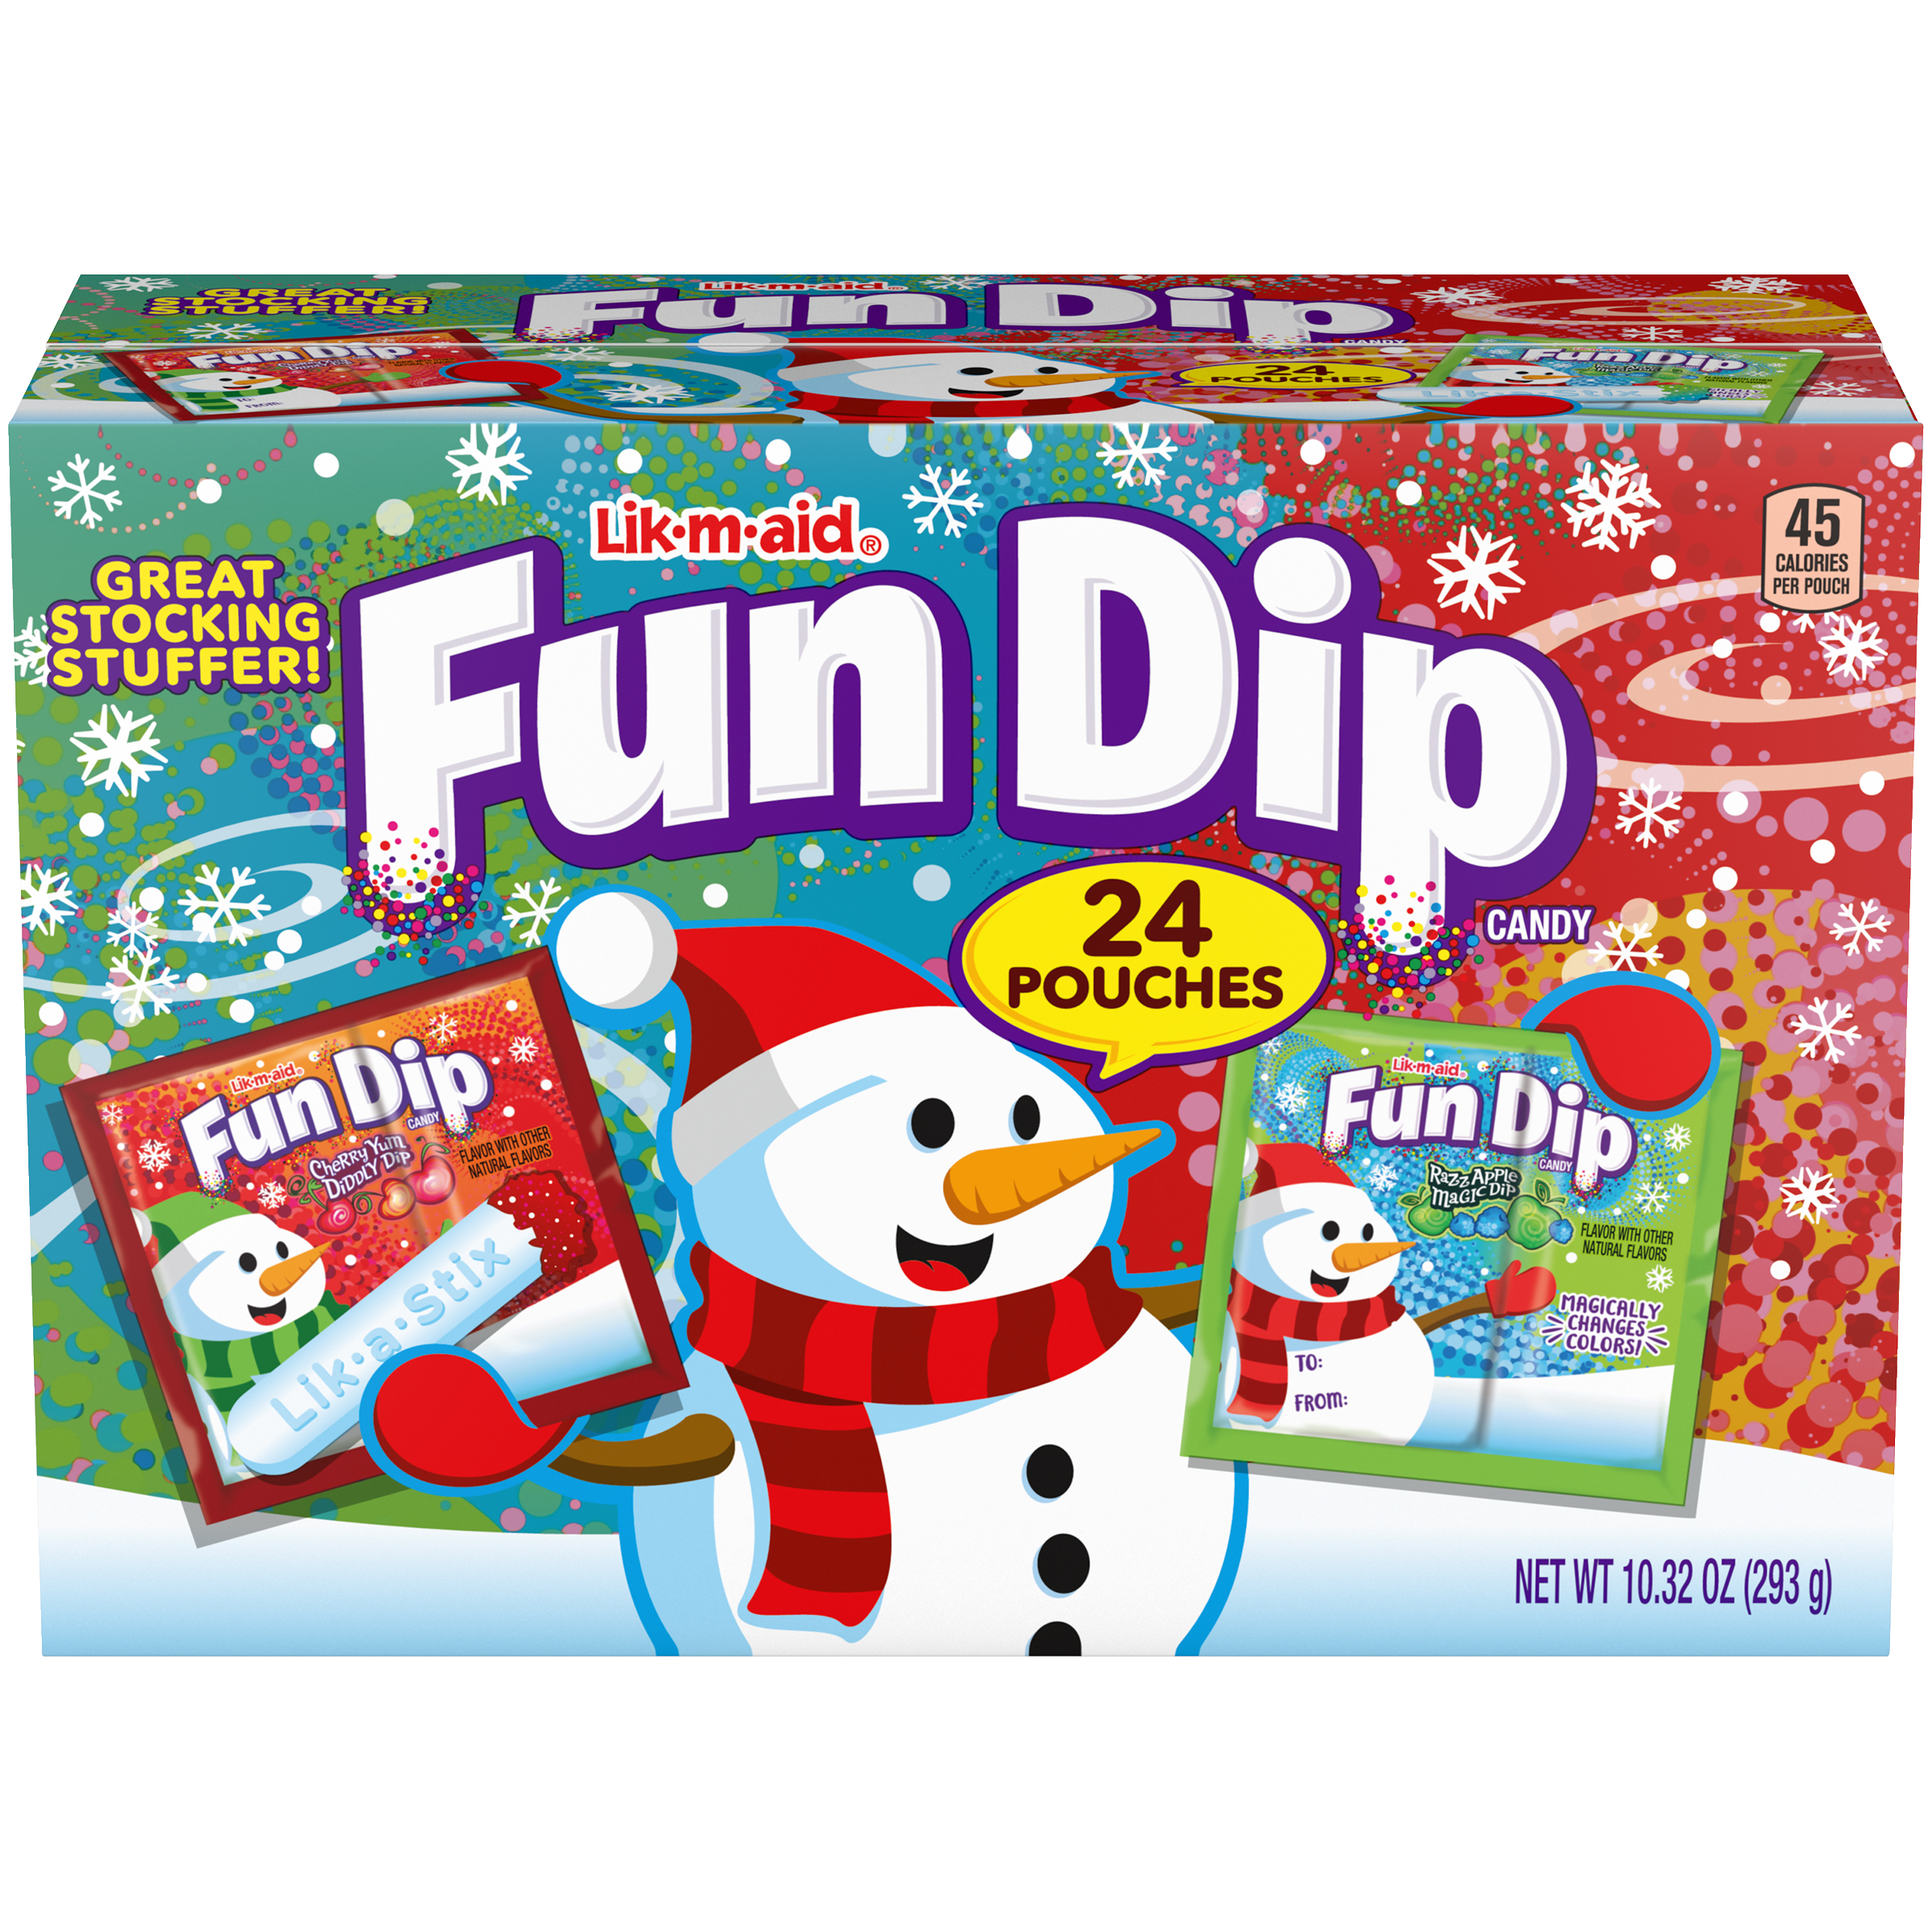 Fun Dip Candy Holiday Variety Pack, Holiday Candy, Christmas Stocking Stuffers 24 Pouches, 10.3oz - image 1 of 11